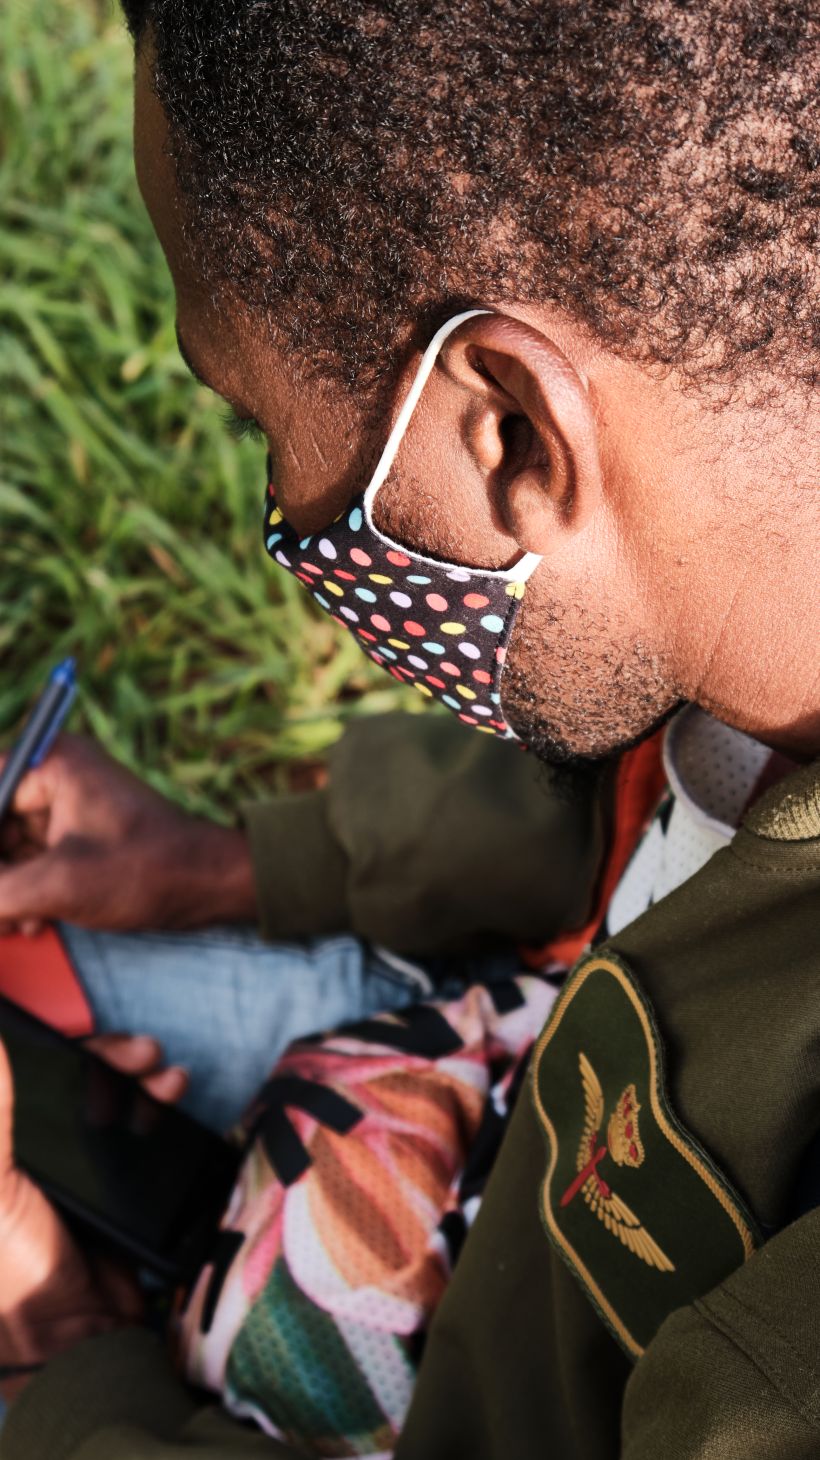 A photo of Mamadou, 28, from Mali, writing a note in Pular